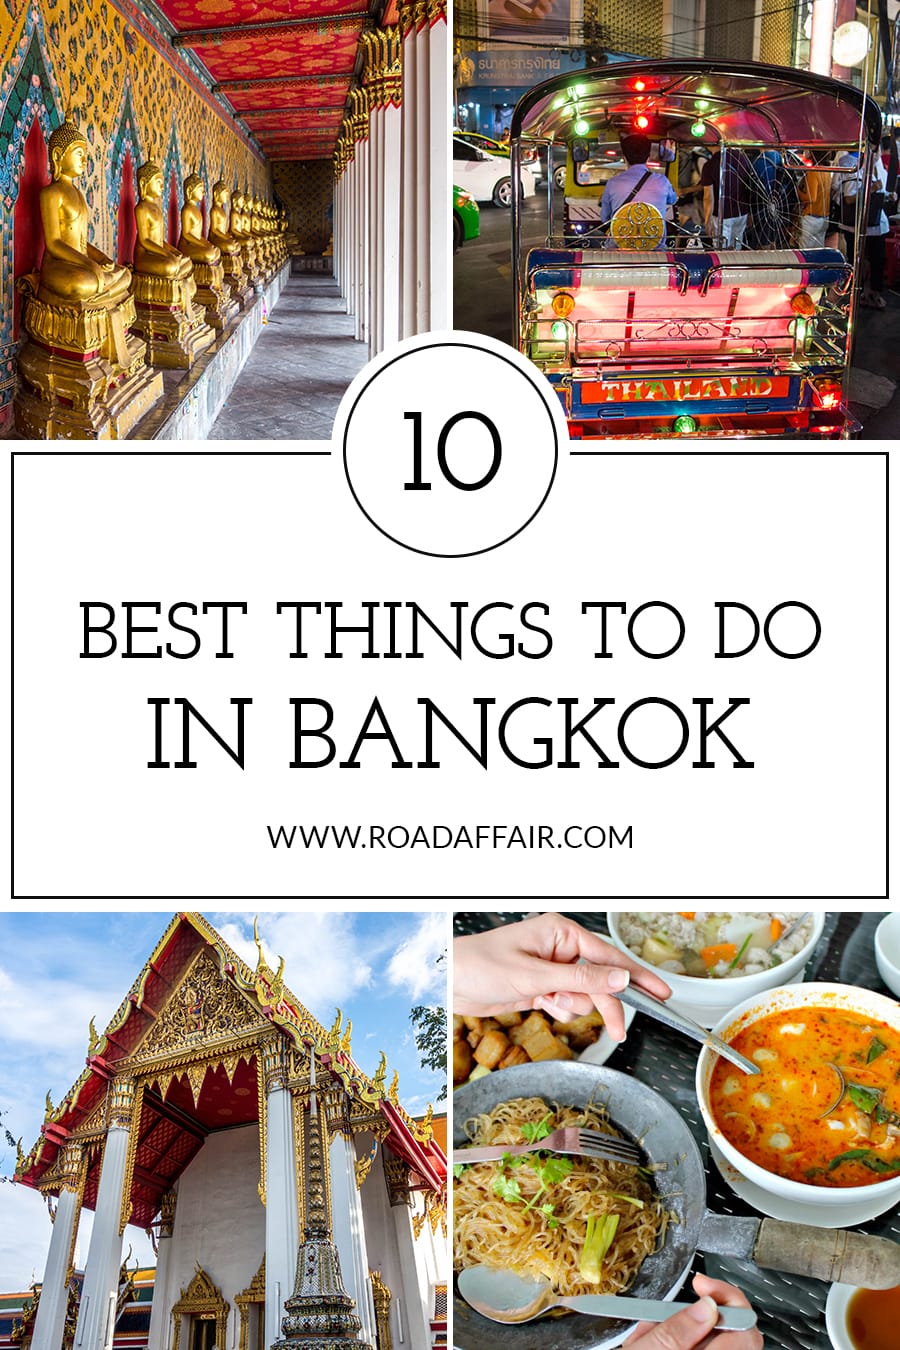 Best Things to Do in Bangkok, Thailand